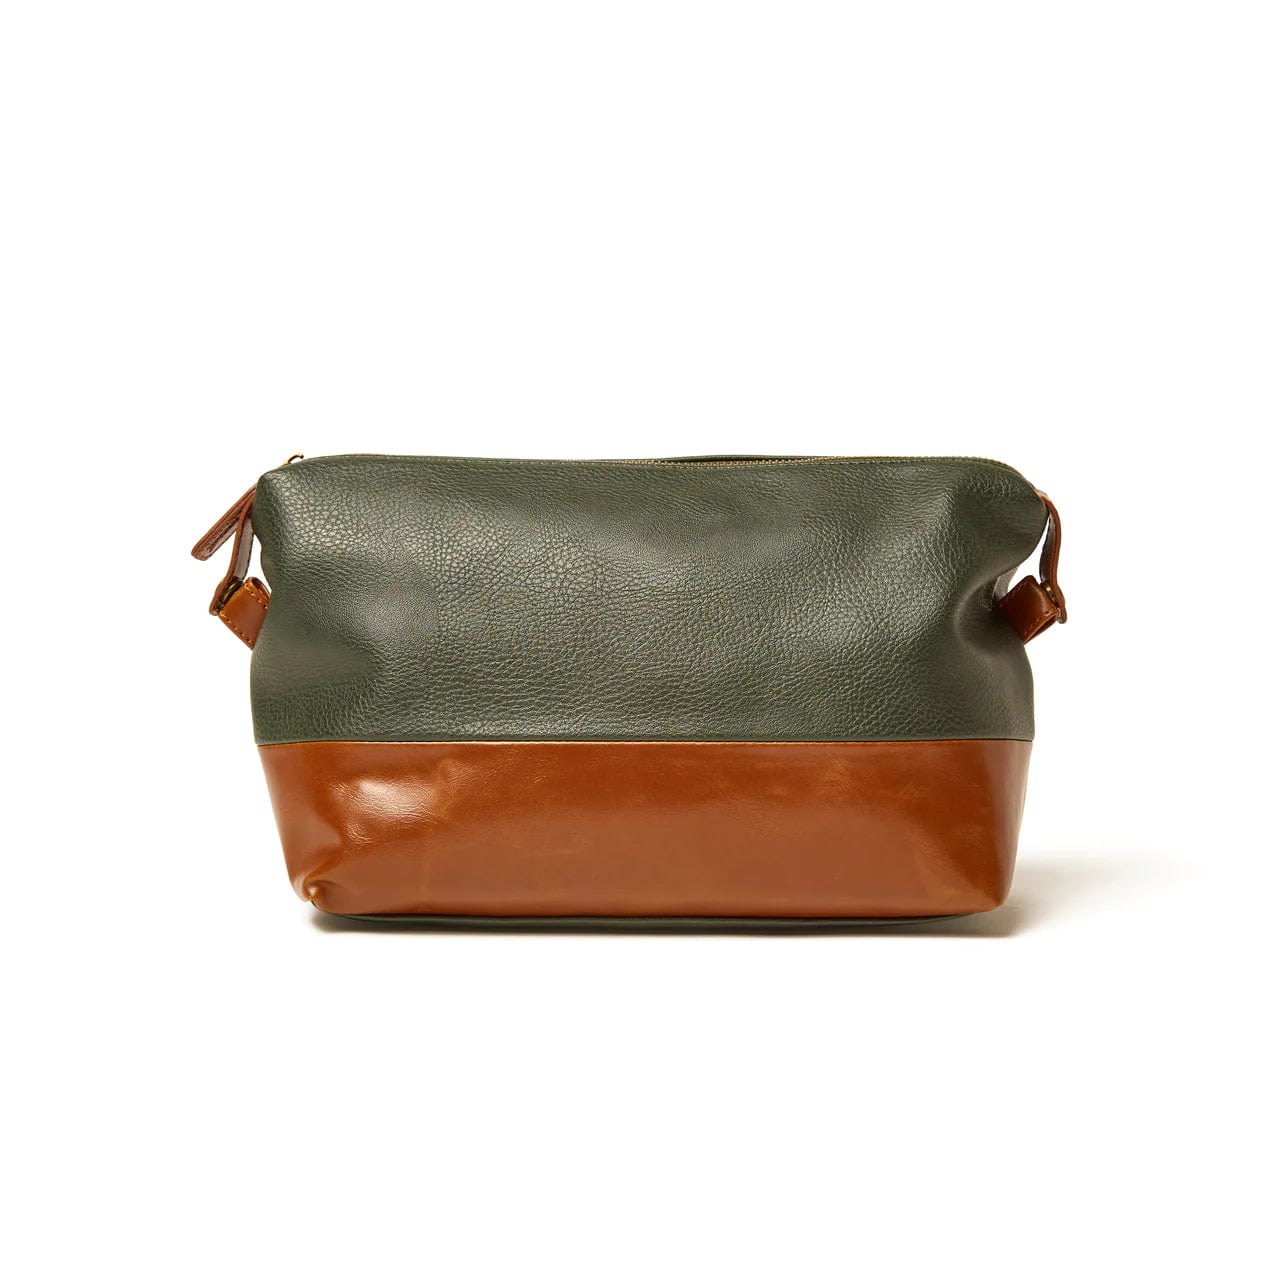 Brouk & Co. Travel Accessories Green Brouk & Co. Toiletry Bag